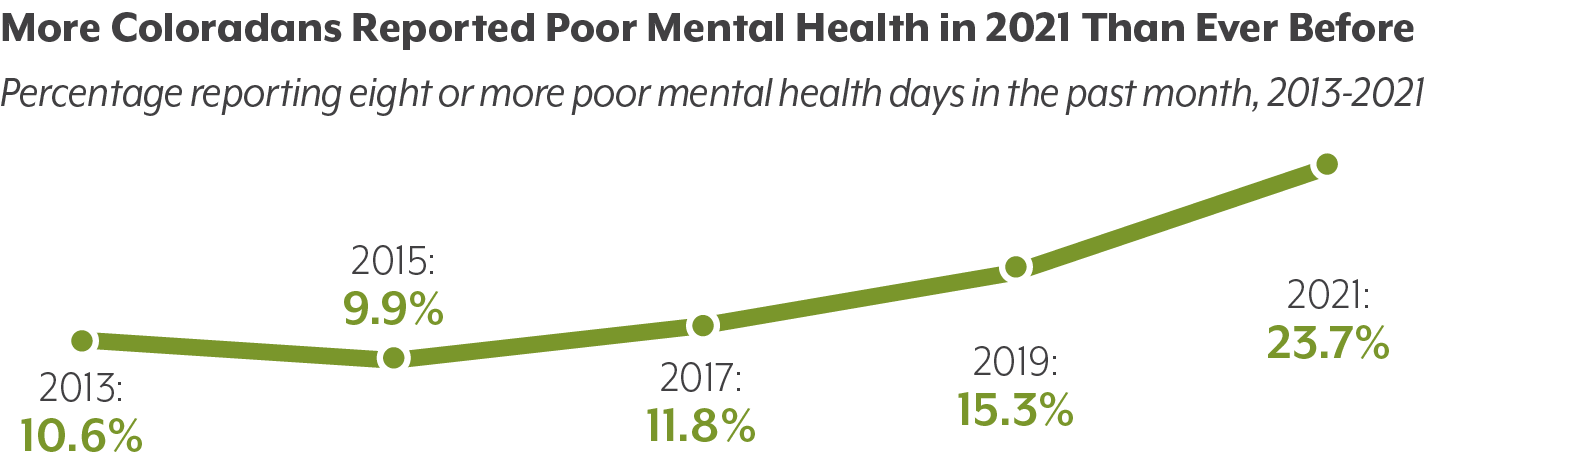 Graphic showing increase in prevalence of poor mental health to 23.7% in 2021